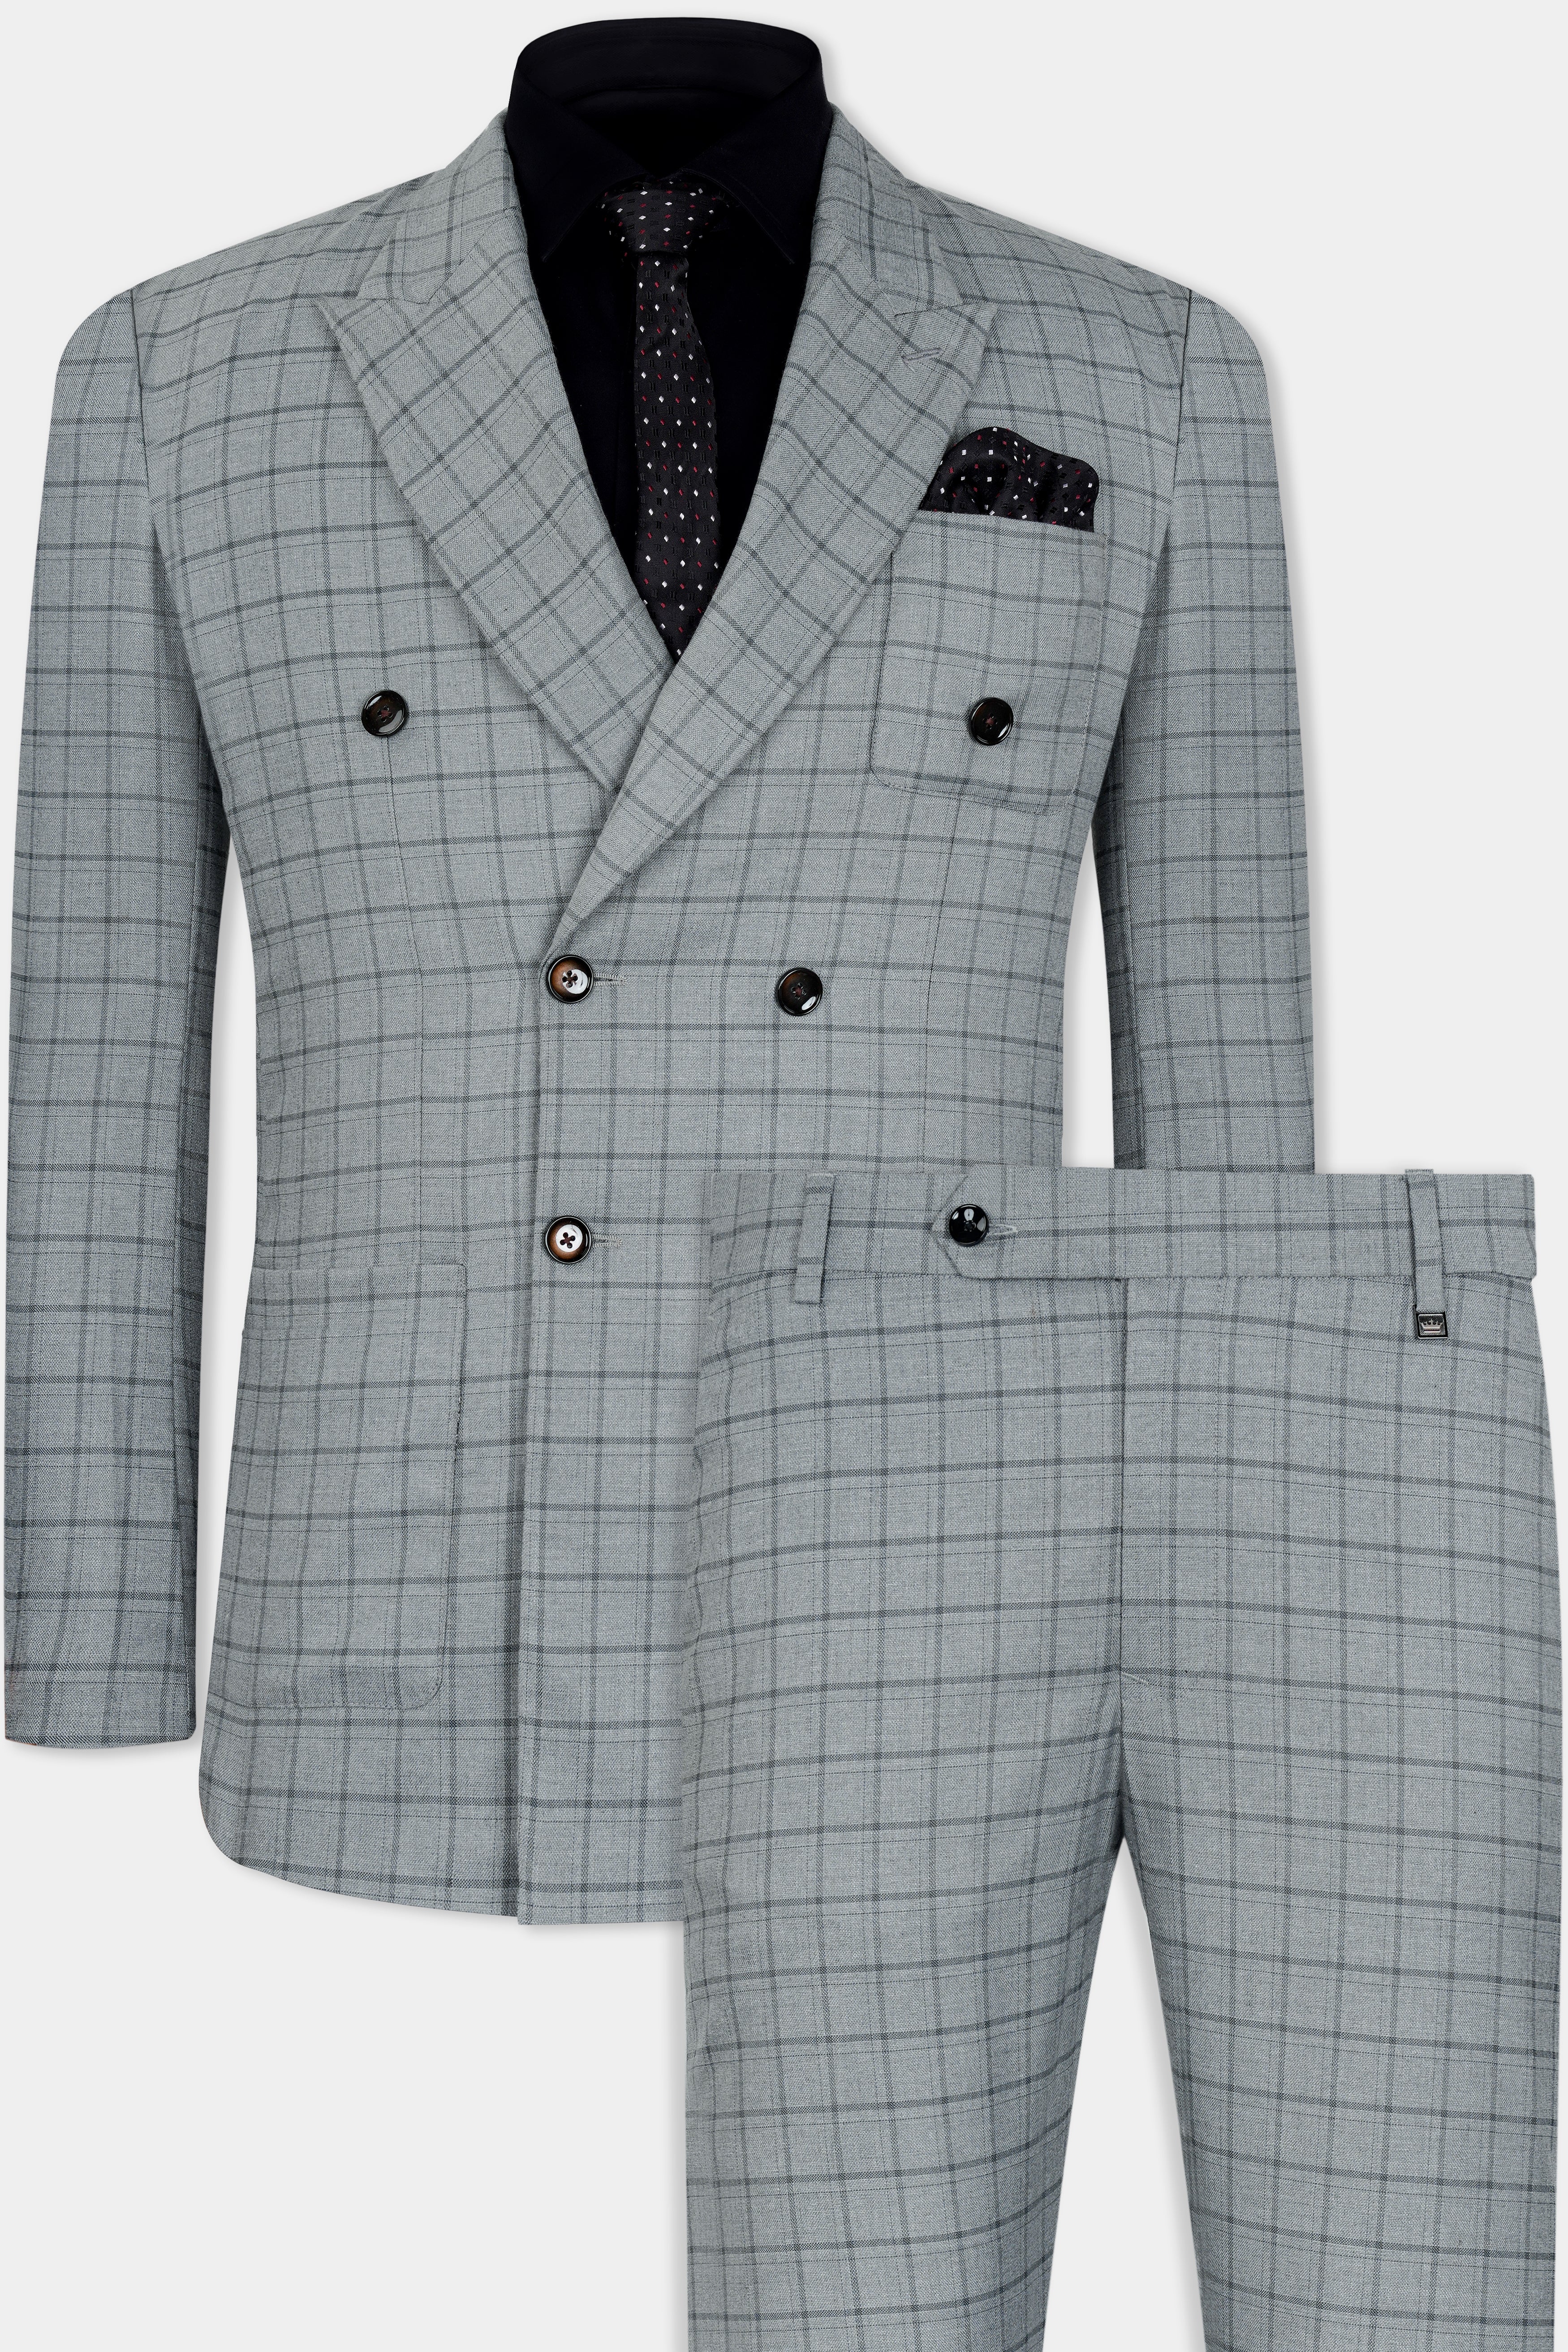 Boulder Gray Checkered Wool Rich Double Breasted Suit ST2930-DB-PP-36,ST2930-DB-PP-38,ST2930-DB-PP-40,ST2930-DB-PP-42,ST2930-DB-PP-44,ST2930-DB-PP-46,ST2930-DB-PP-48,ST2930-DB-PP-50,ST2930-DB-PP-52,ST2930-DB-PP-54,ST2930-DB-PP-56,ST2930-DB-PP-58,ST2930-DB-PP-60